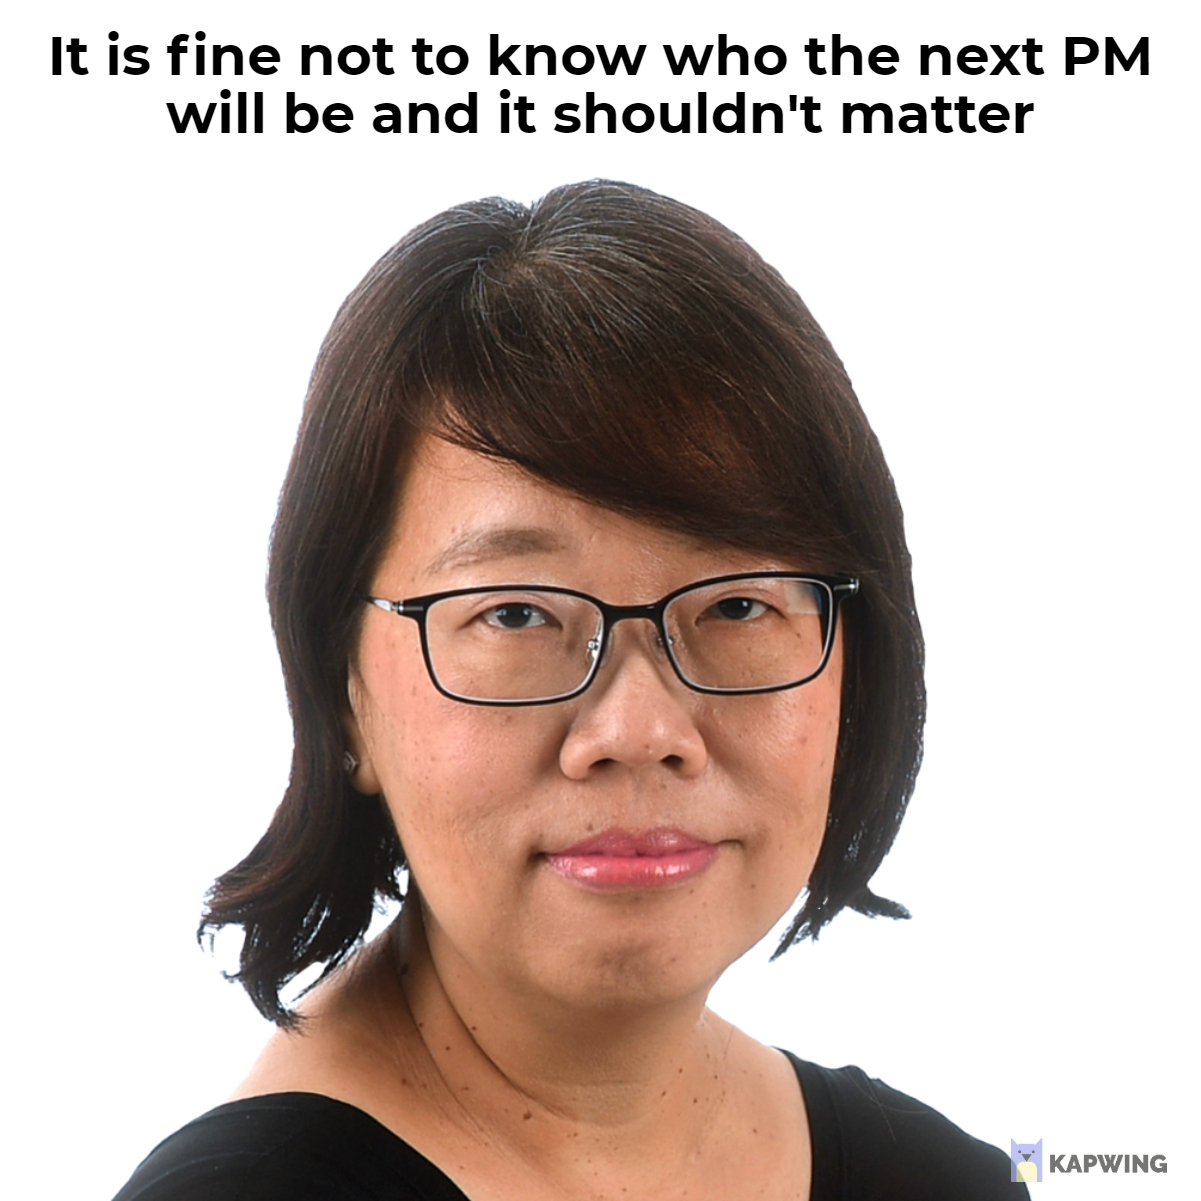 chua-mui-hoong-it-is-fine-not-to-know-who-the-next-pm-will-be-and-it-shouldnt-matter-jpeg.108286